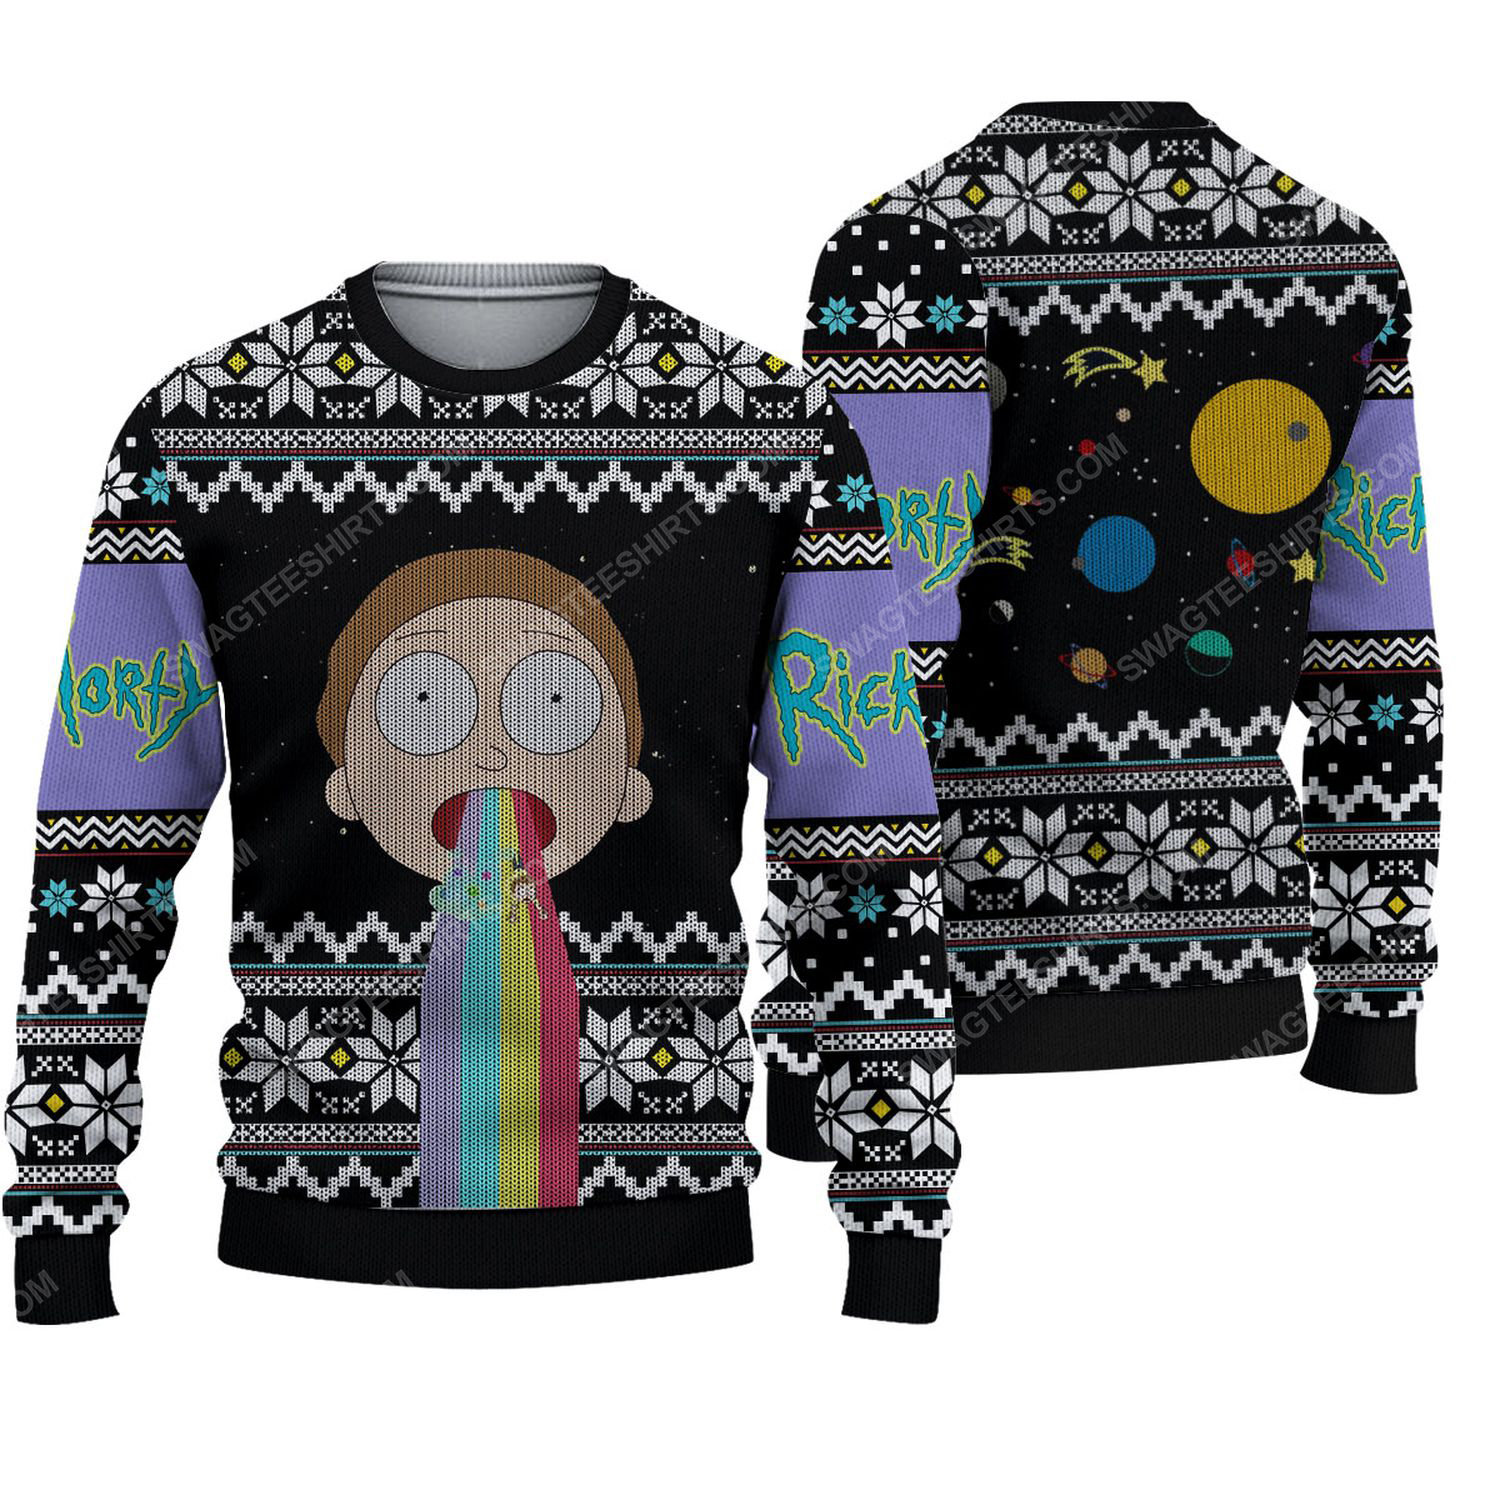 Rick and morty tv show ugly christmas sweater 1 - Copy